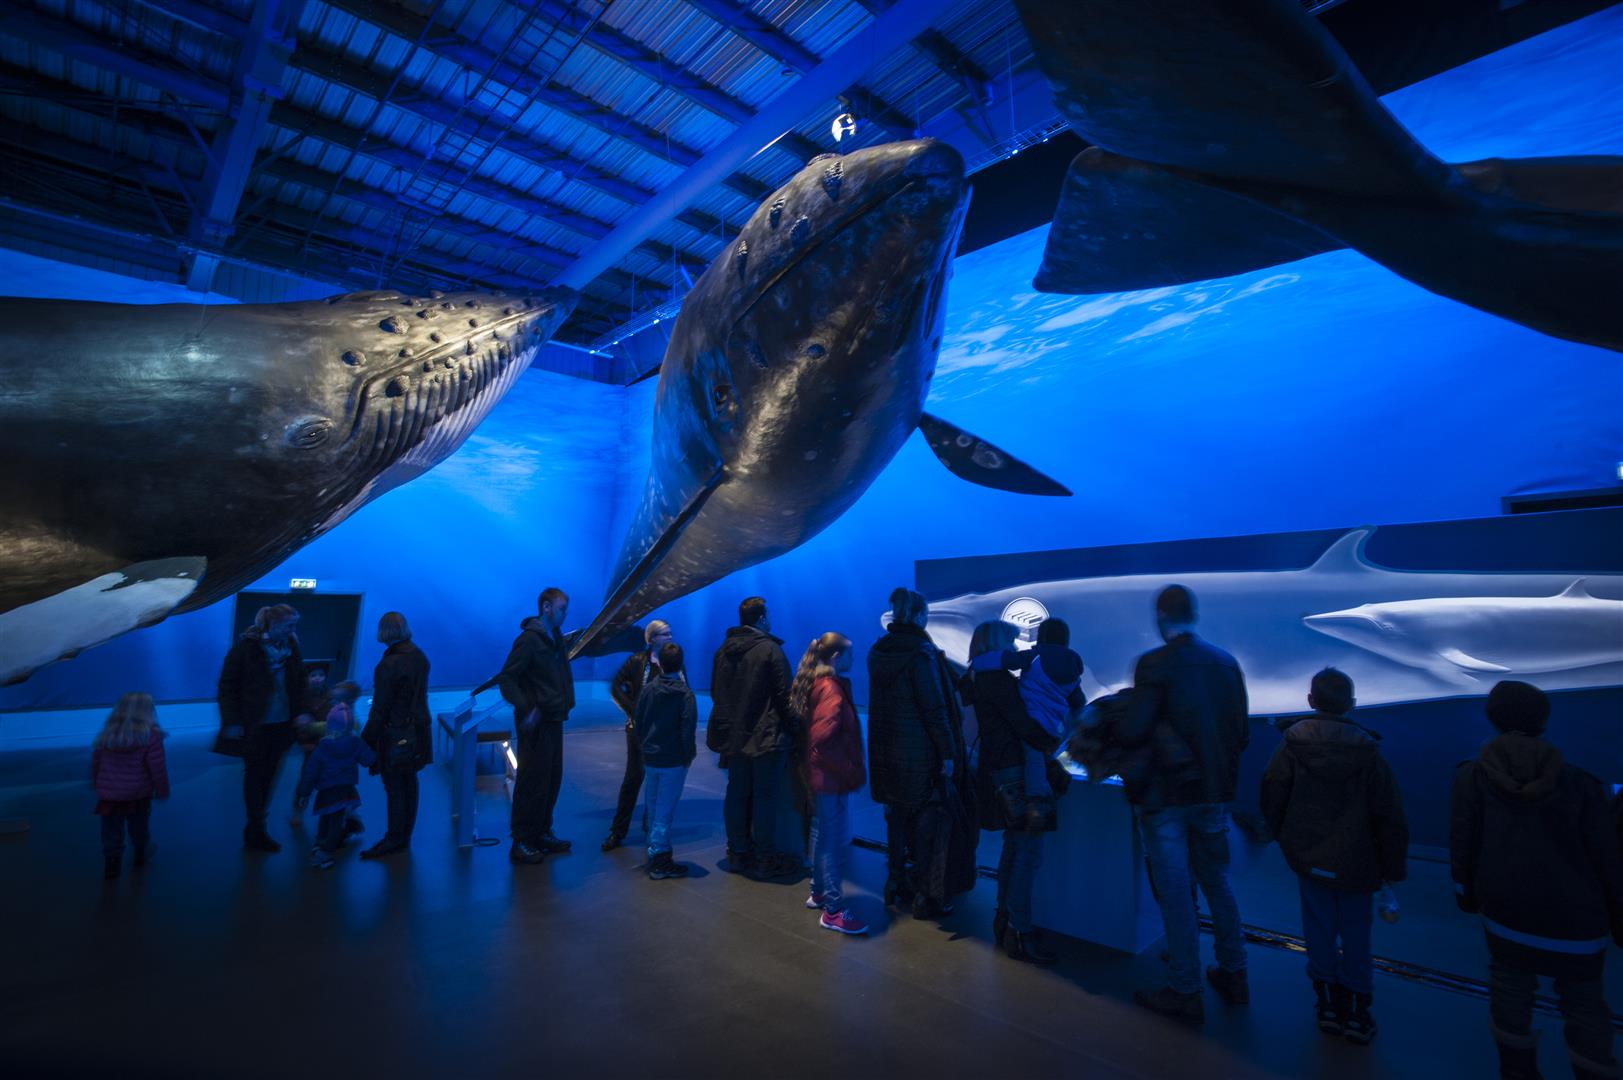 Whales of Iceland has 23 life-sized models.